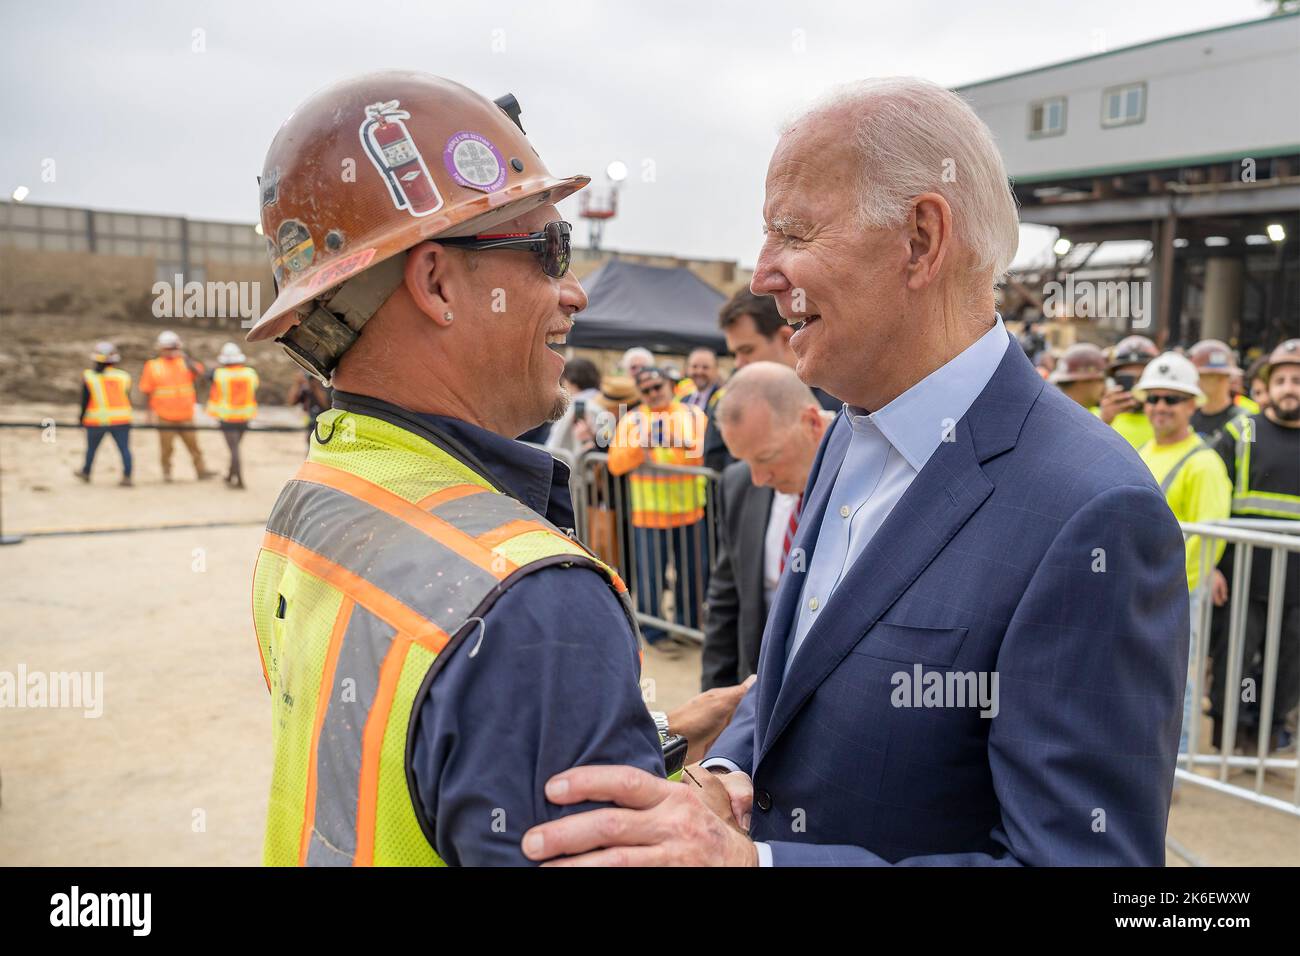 Los Angeles, United States. 13th Oct, 2022. U.S. President Joe Biden, greets a union worker at the Los Angeles Metro, D Line Extension Transit Project, October 13, 2022, in Los Angeles, California. Credit: Adam Schultz/White House Photo/Alamy Live News Stock Photo